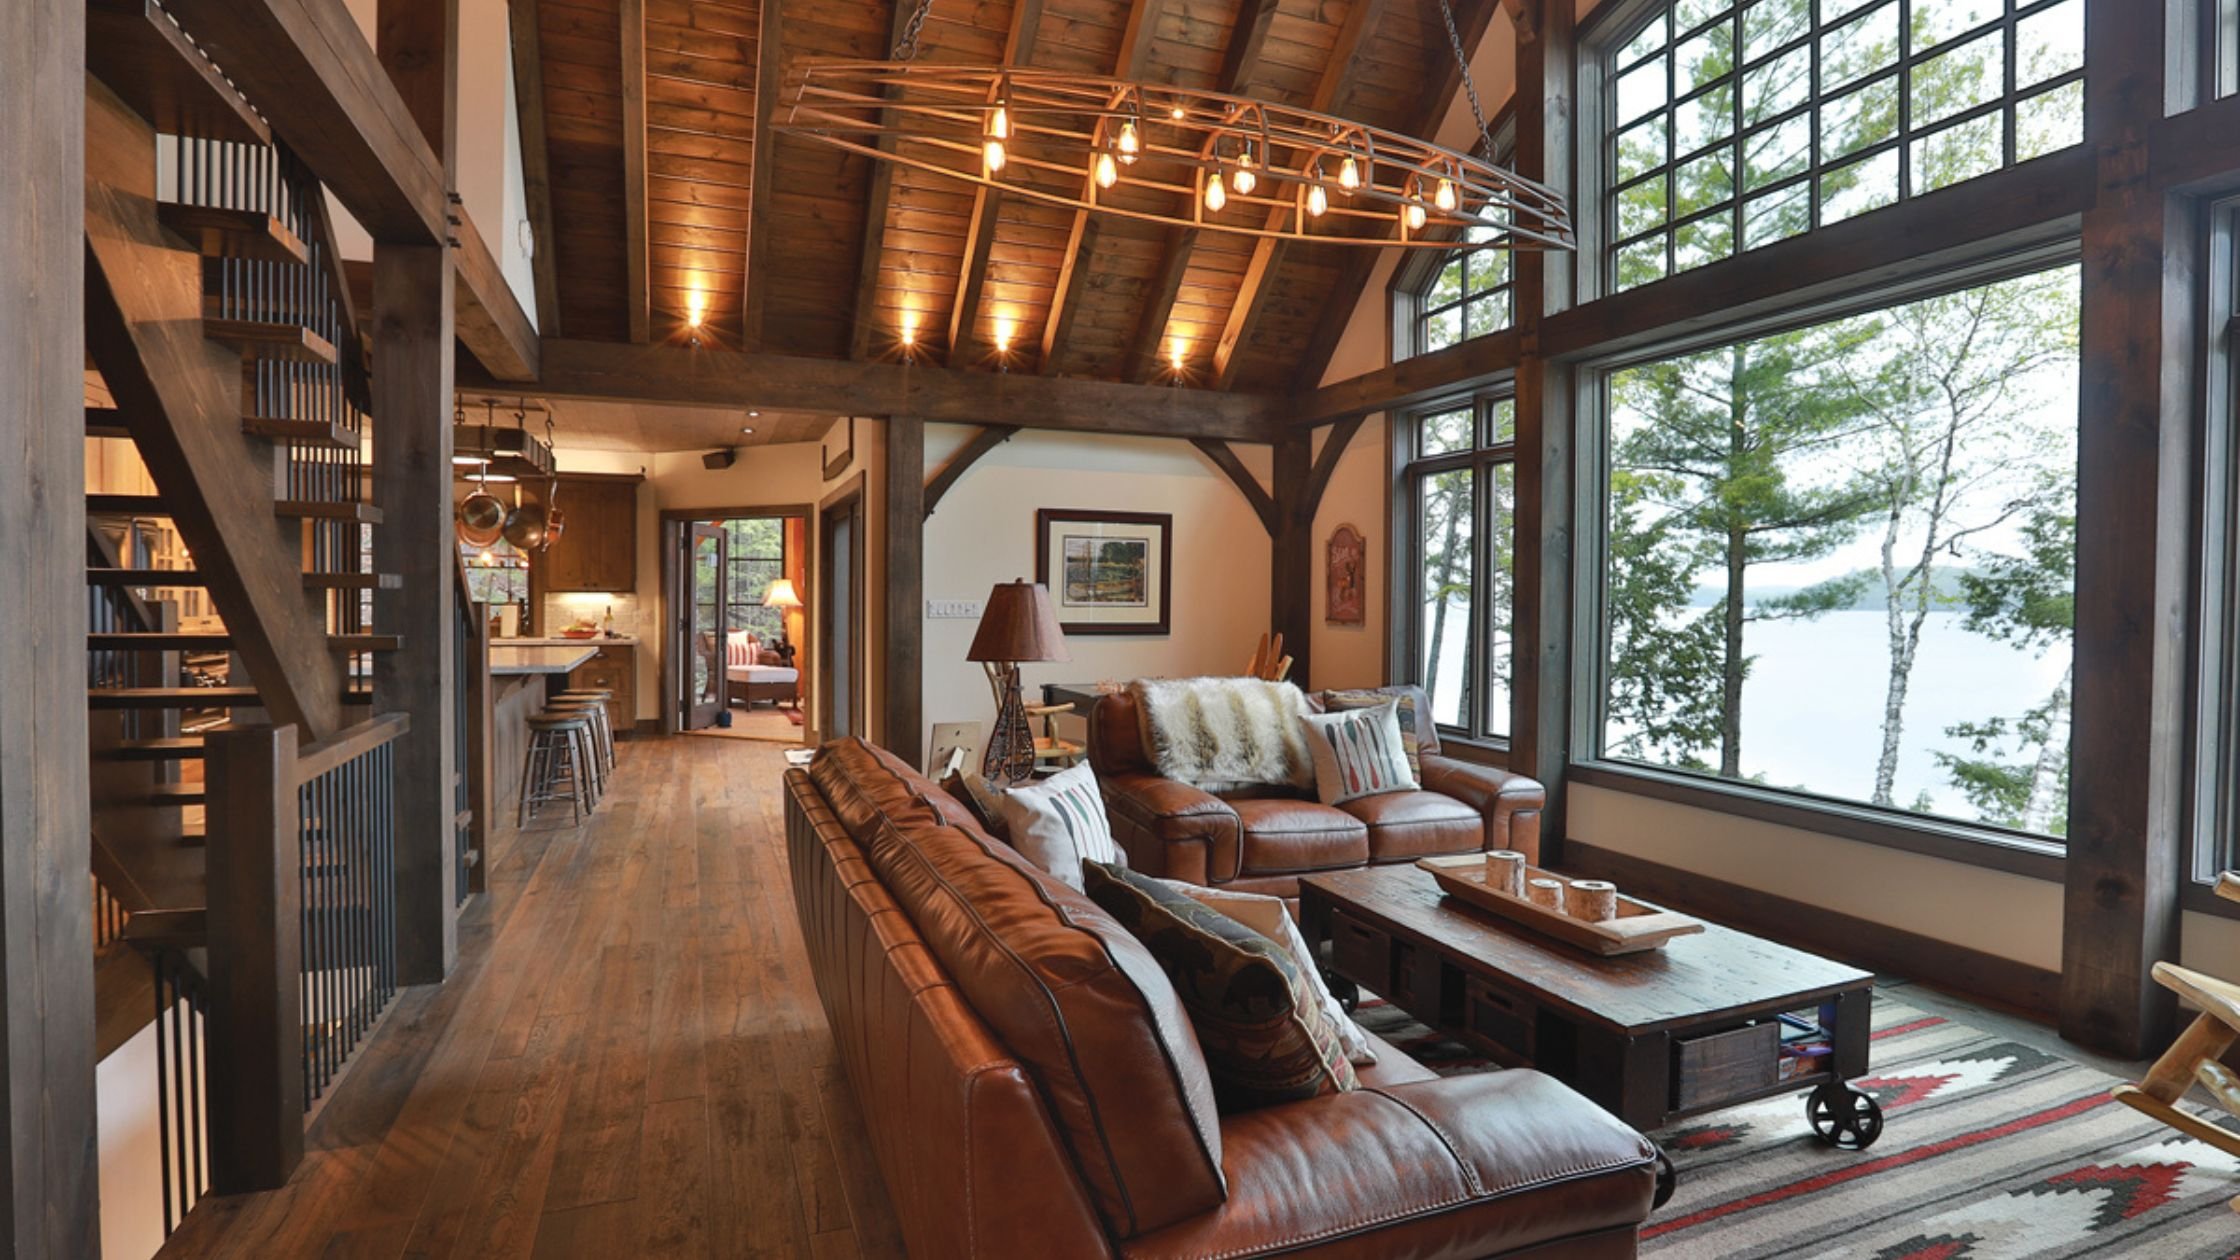 Design Timber Frame Great Room 11 Other Considerations